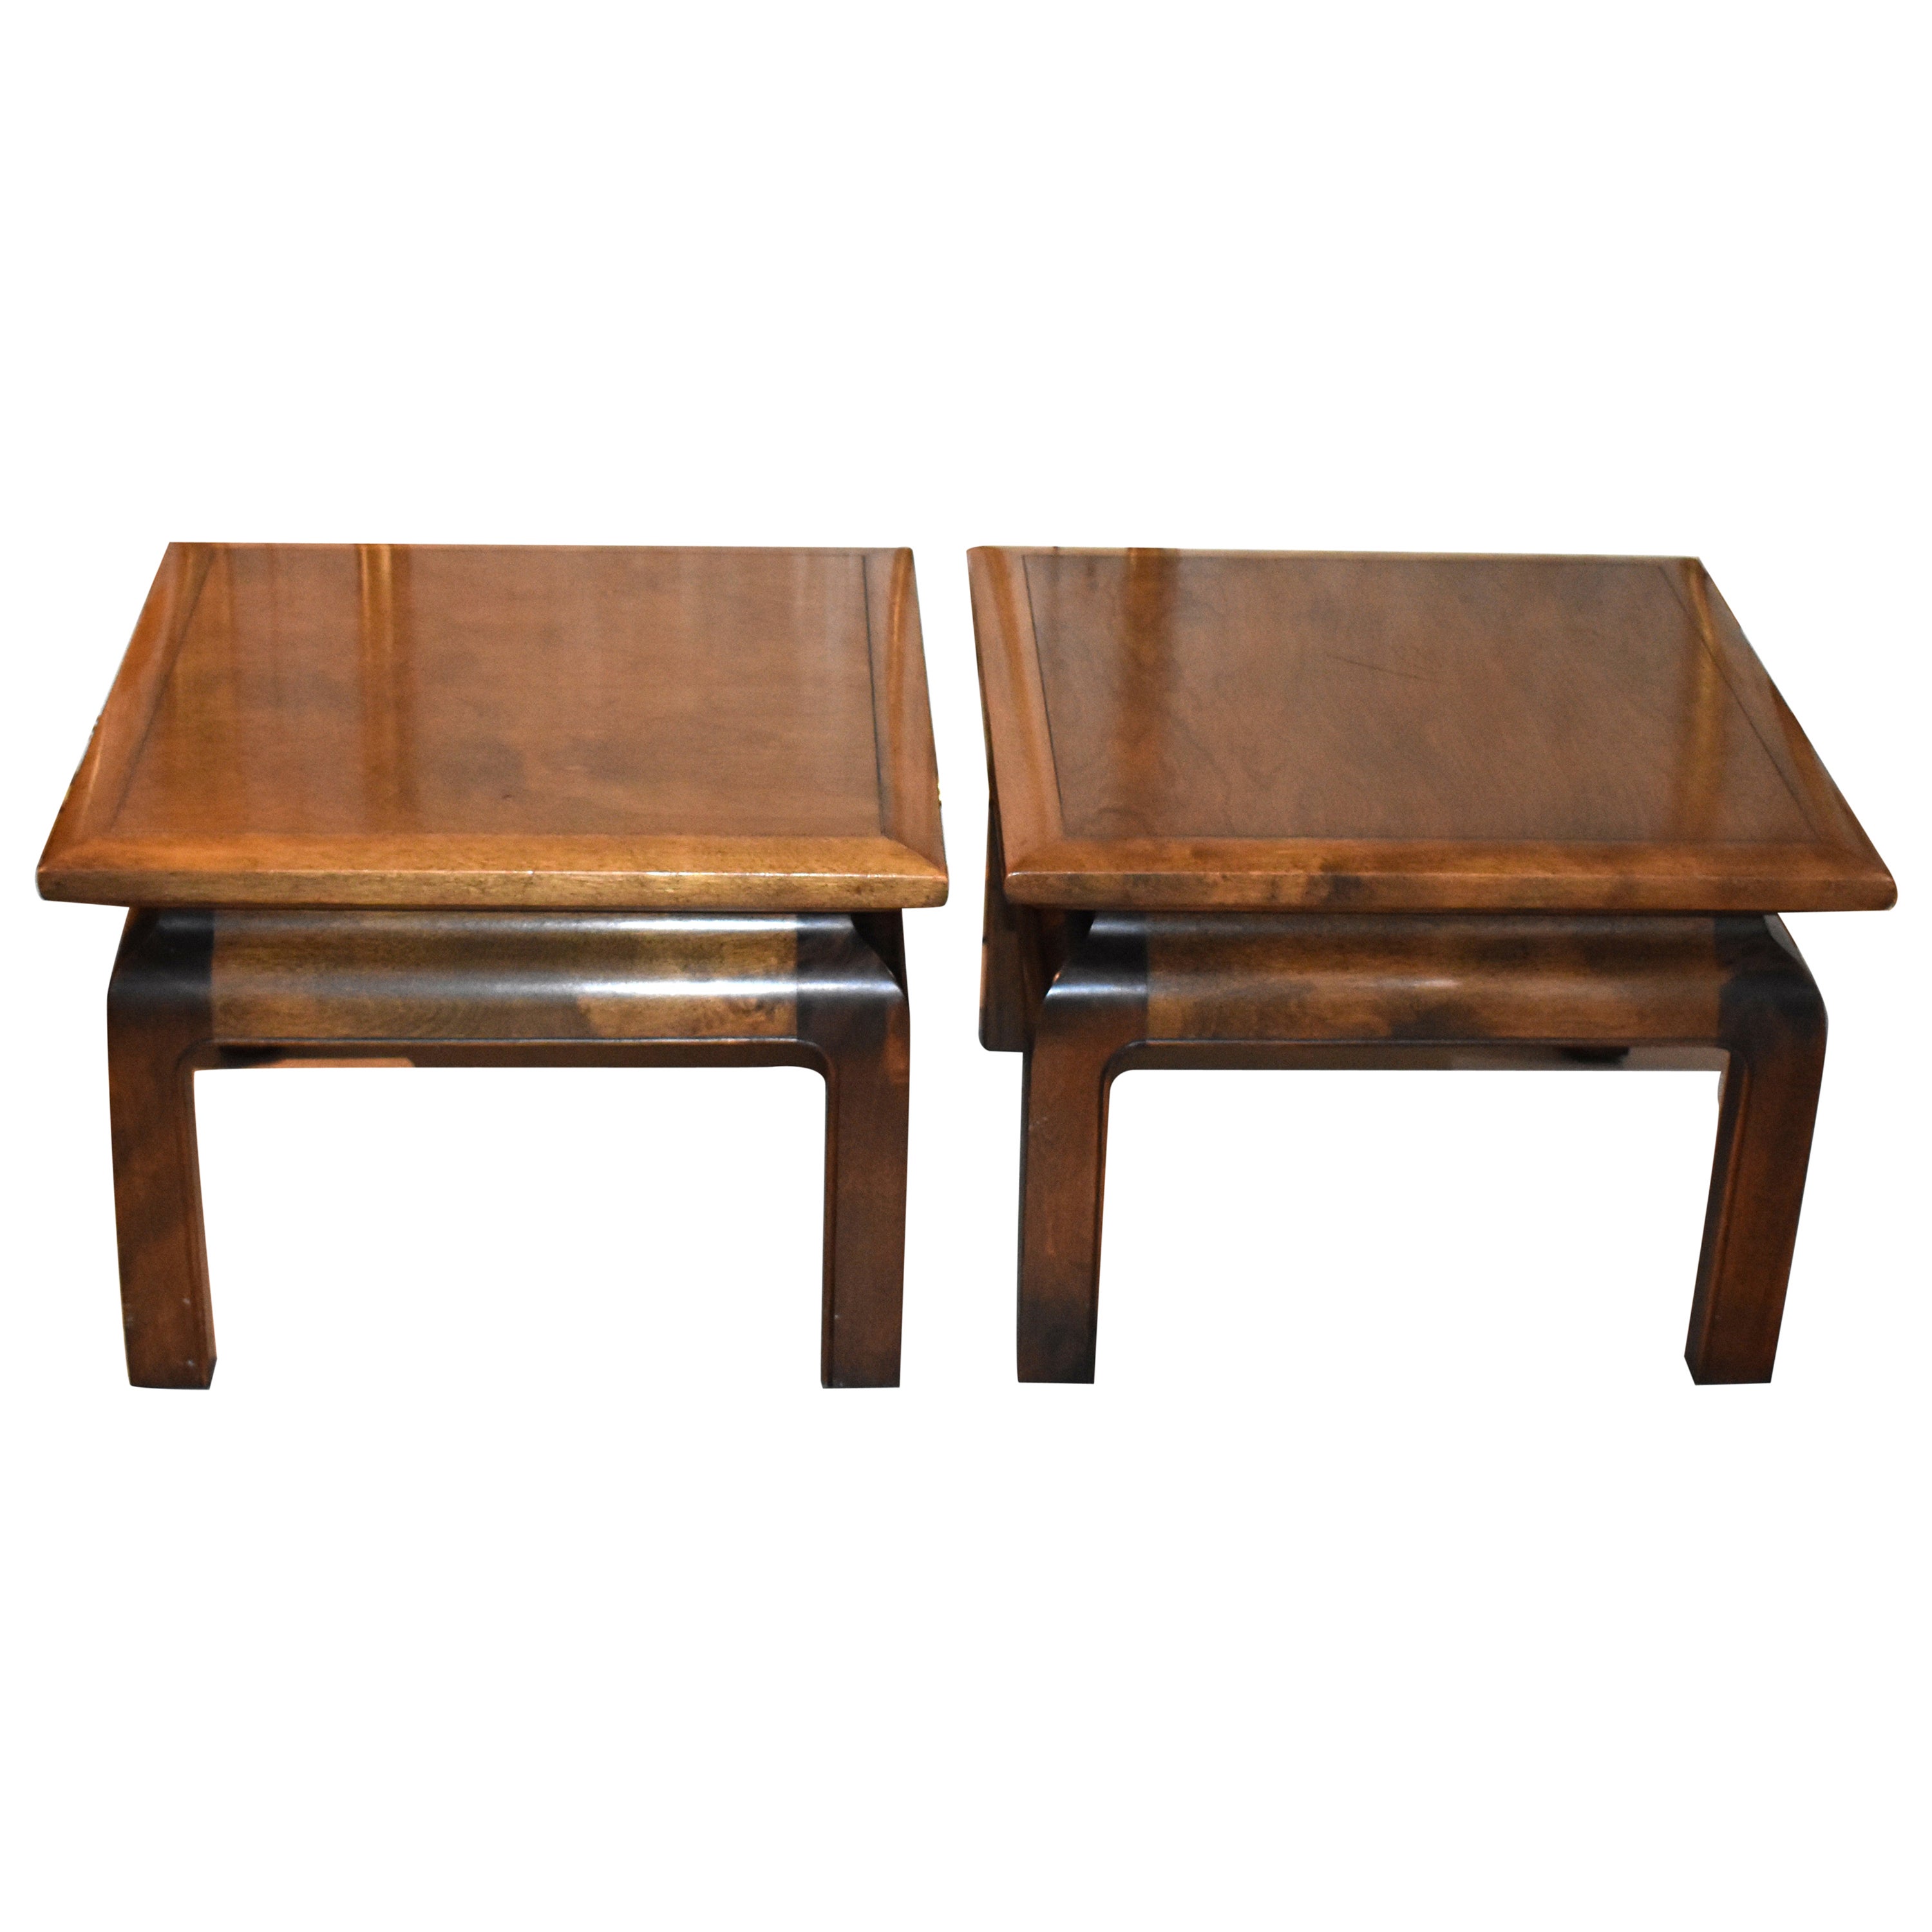 Pair of Asian Style Side Tables by Zimmerman